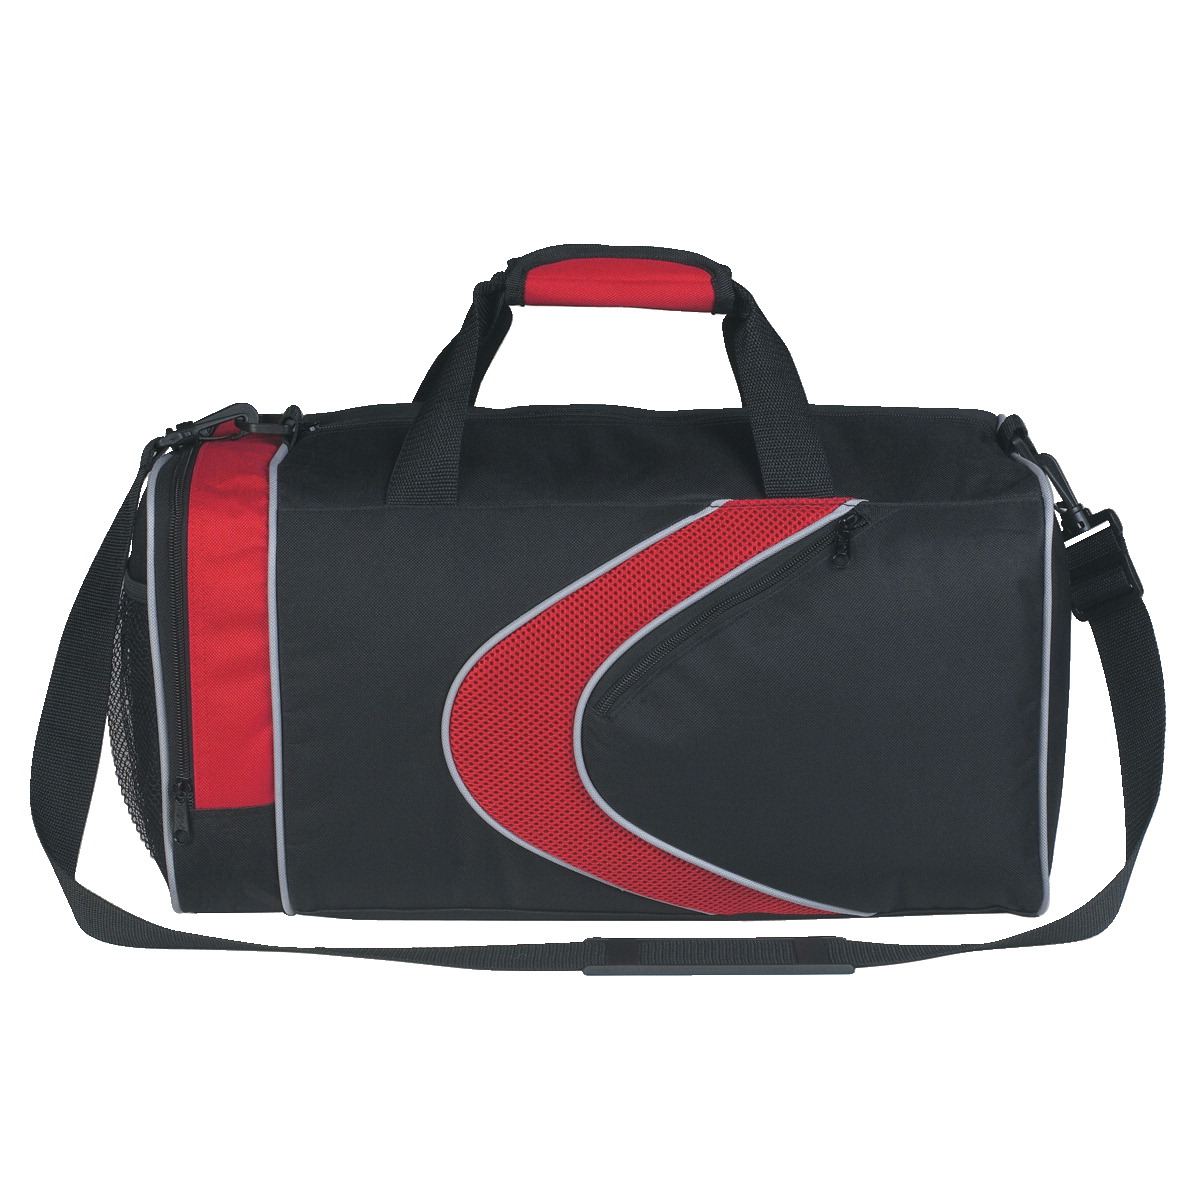 19 X 10 In. Sports Duffle Bag, Polyester & Microfiber - Red & Black